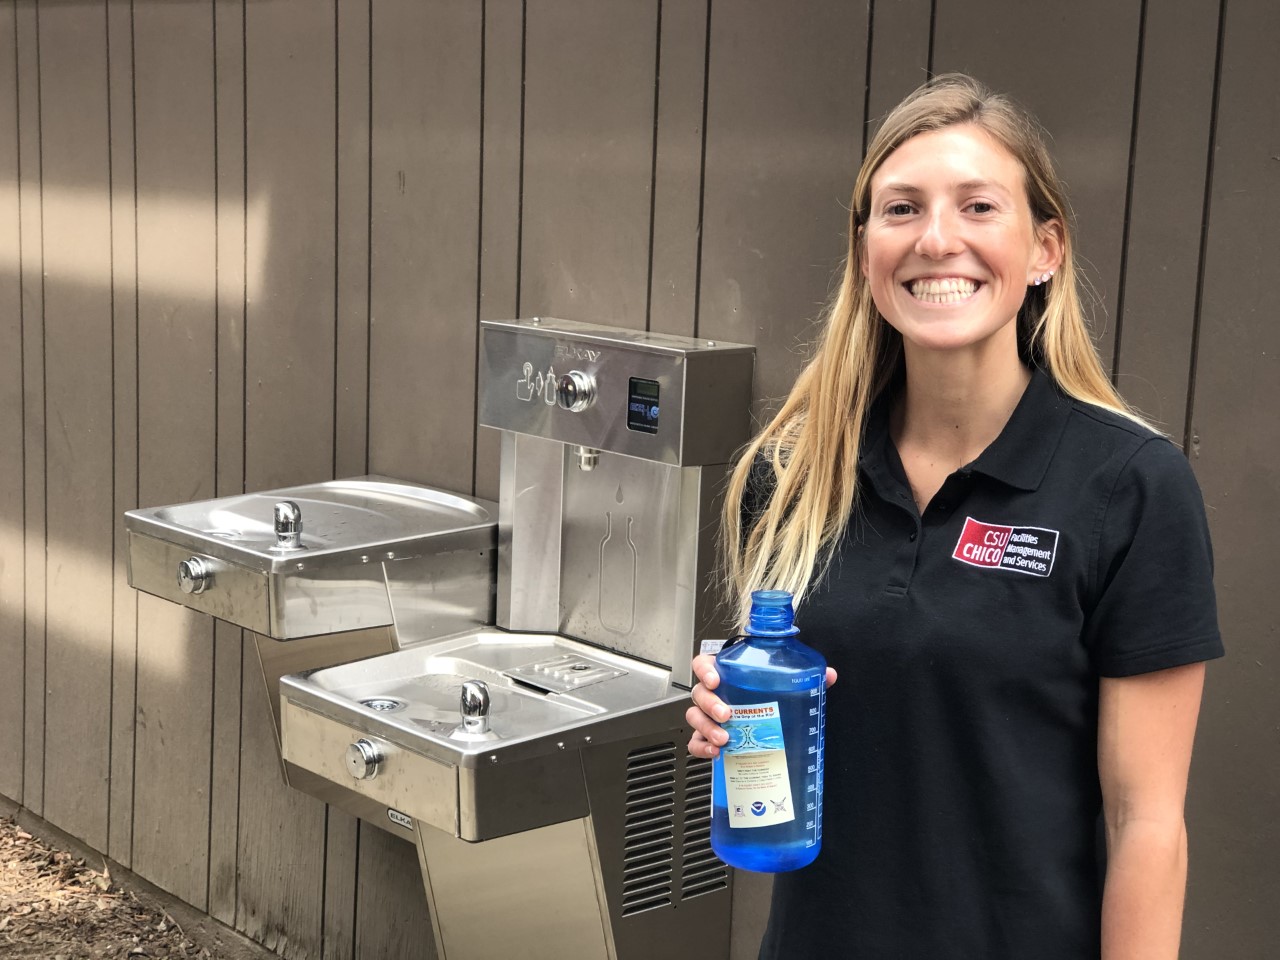 MacKenzie Deeter poses with a reusable water bottle near the water filling stations.